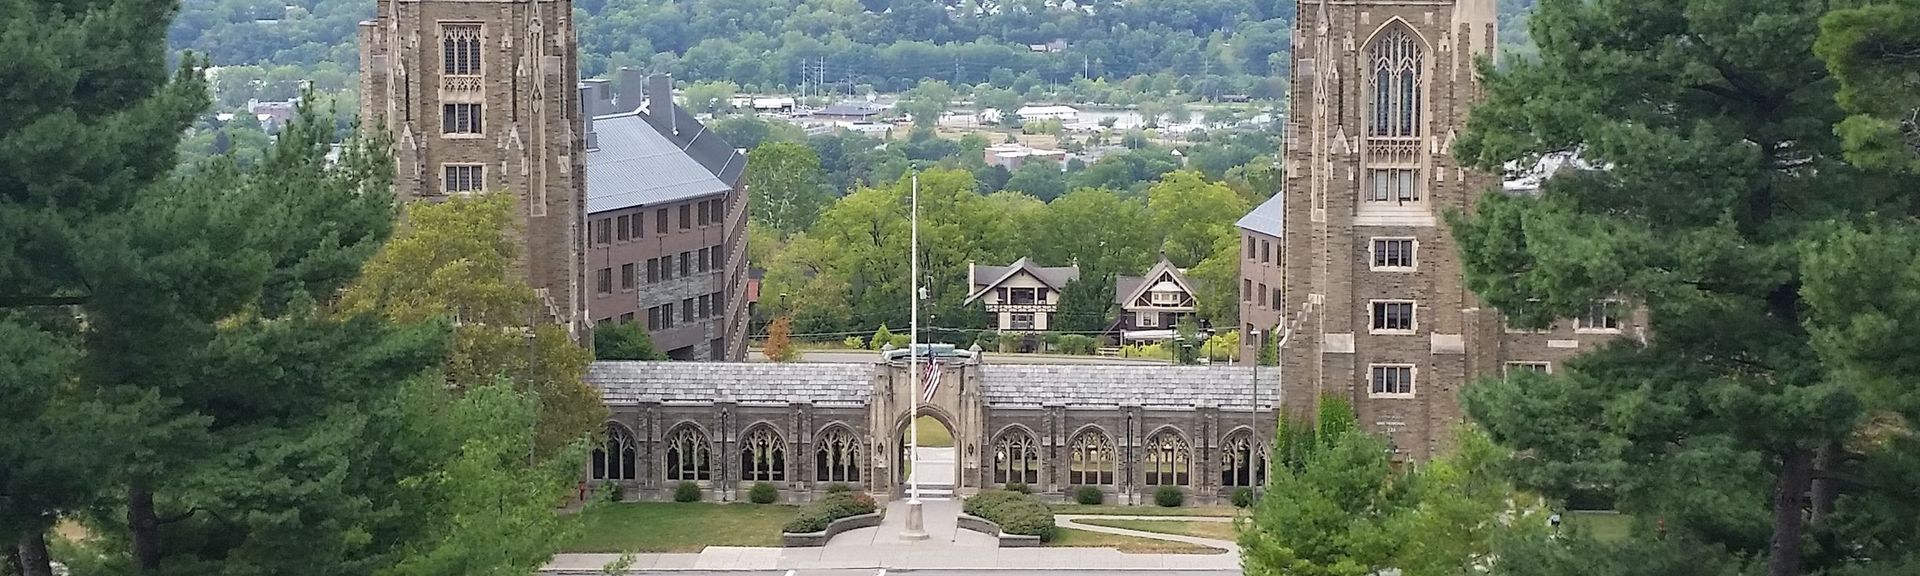 Cornell University, Ithaca Vacation Rentals: house rentals & more | Vrbo